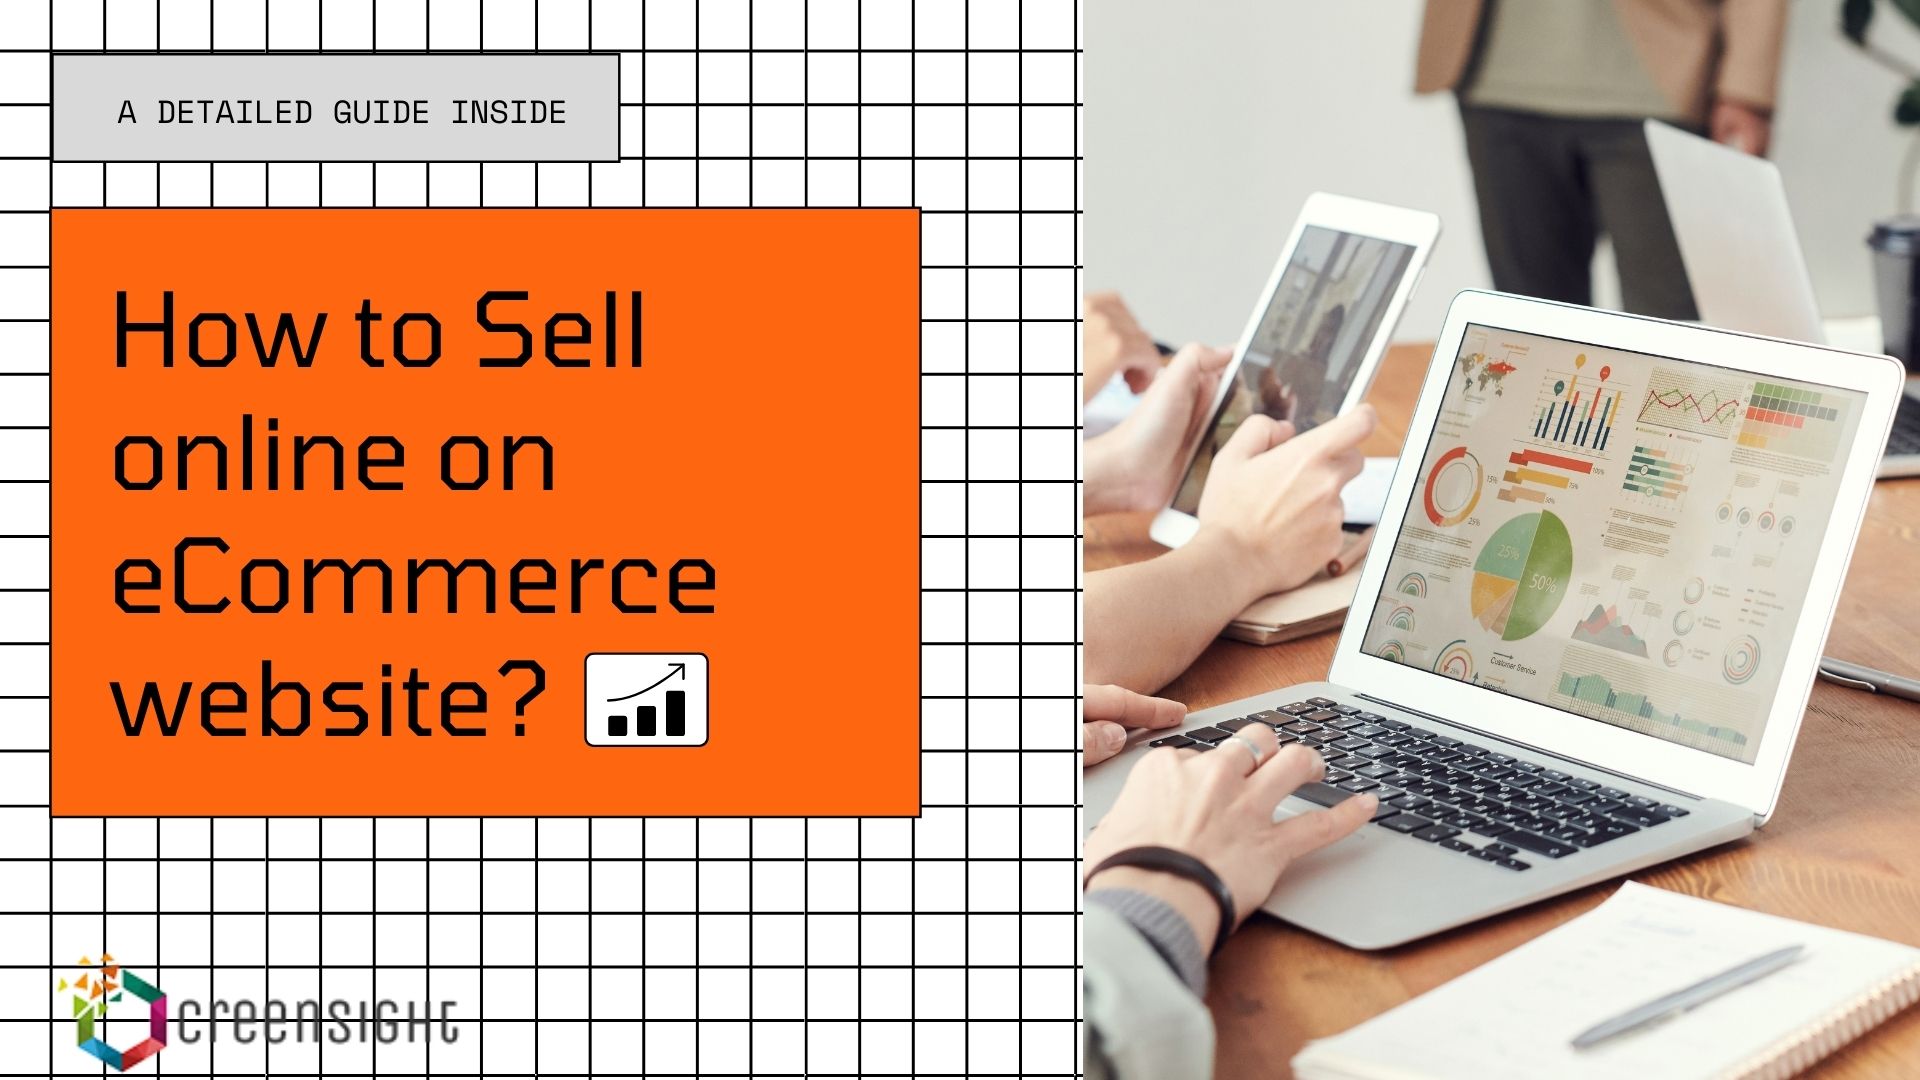 how-to-sell-online-by-developing-an-ecommerce-website